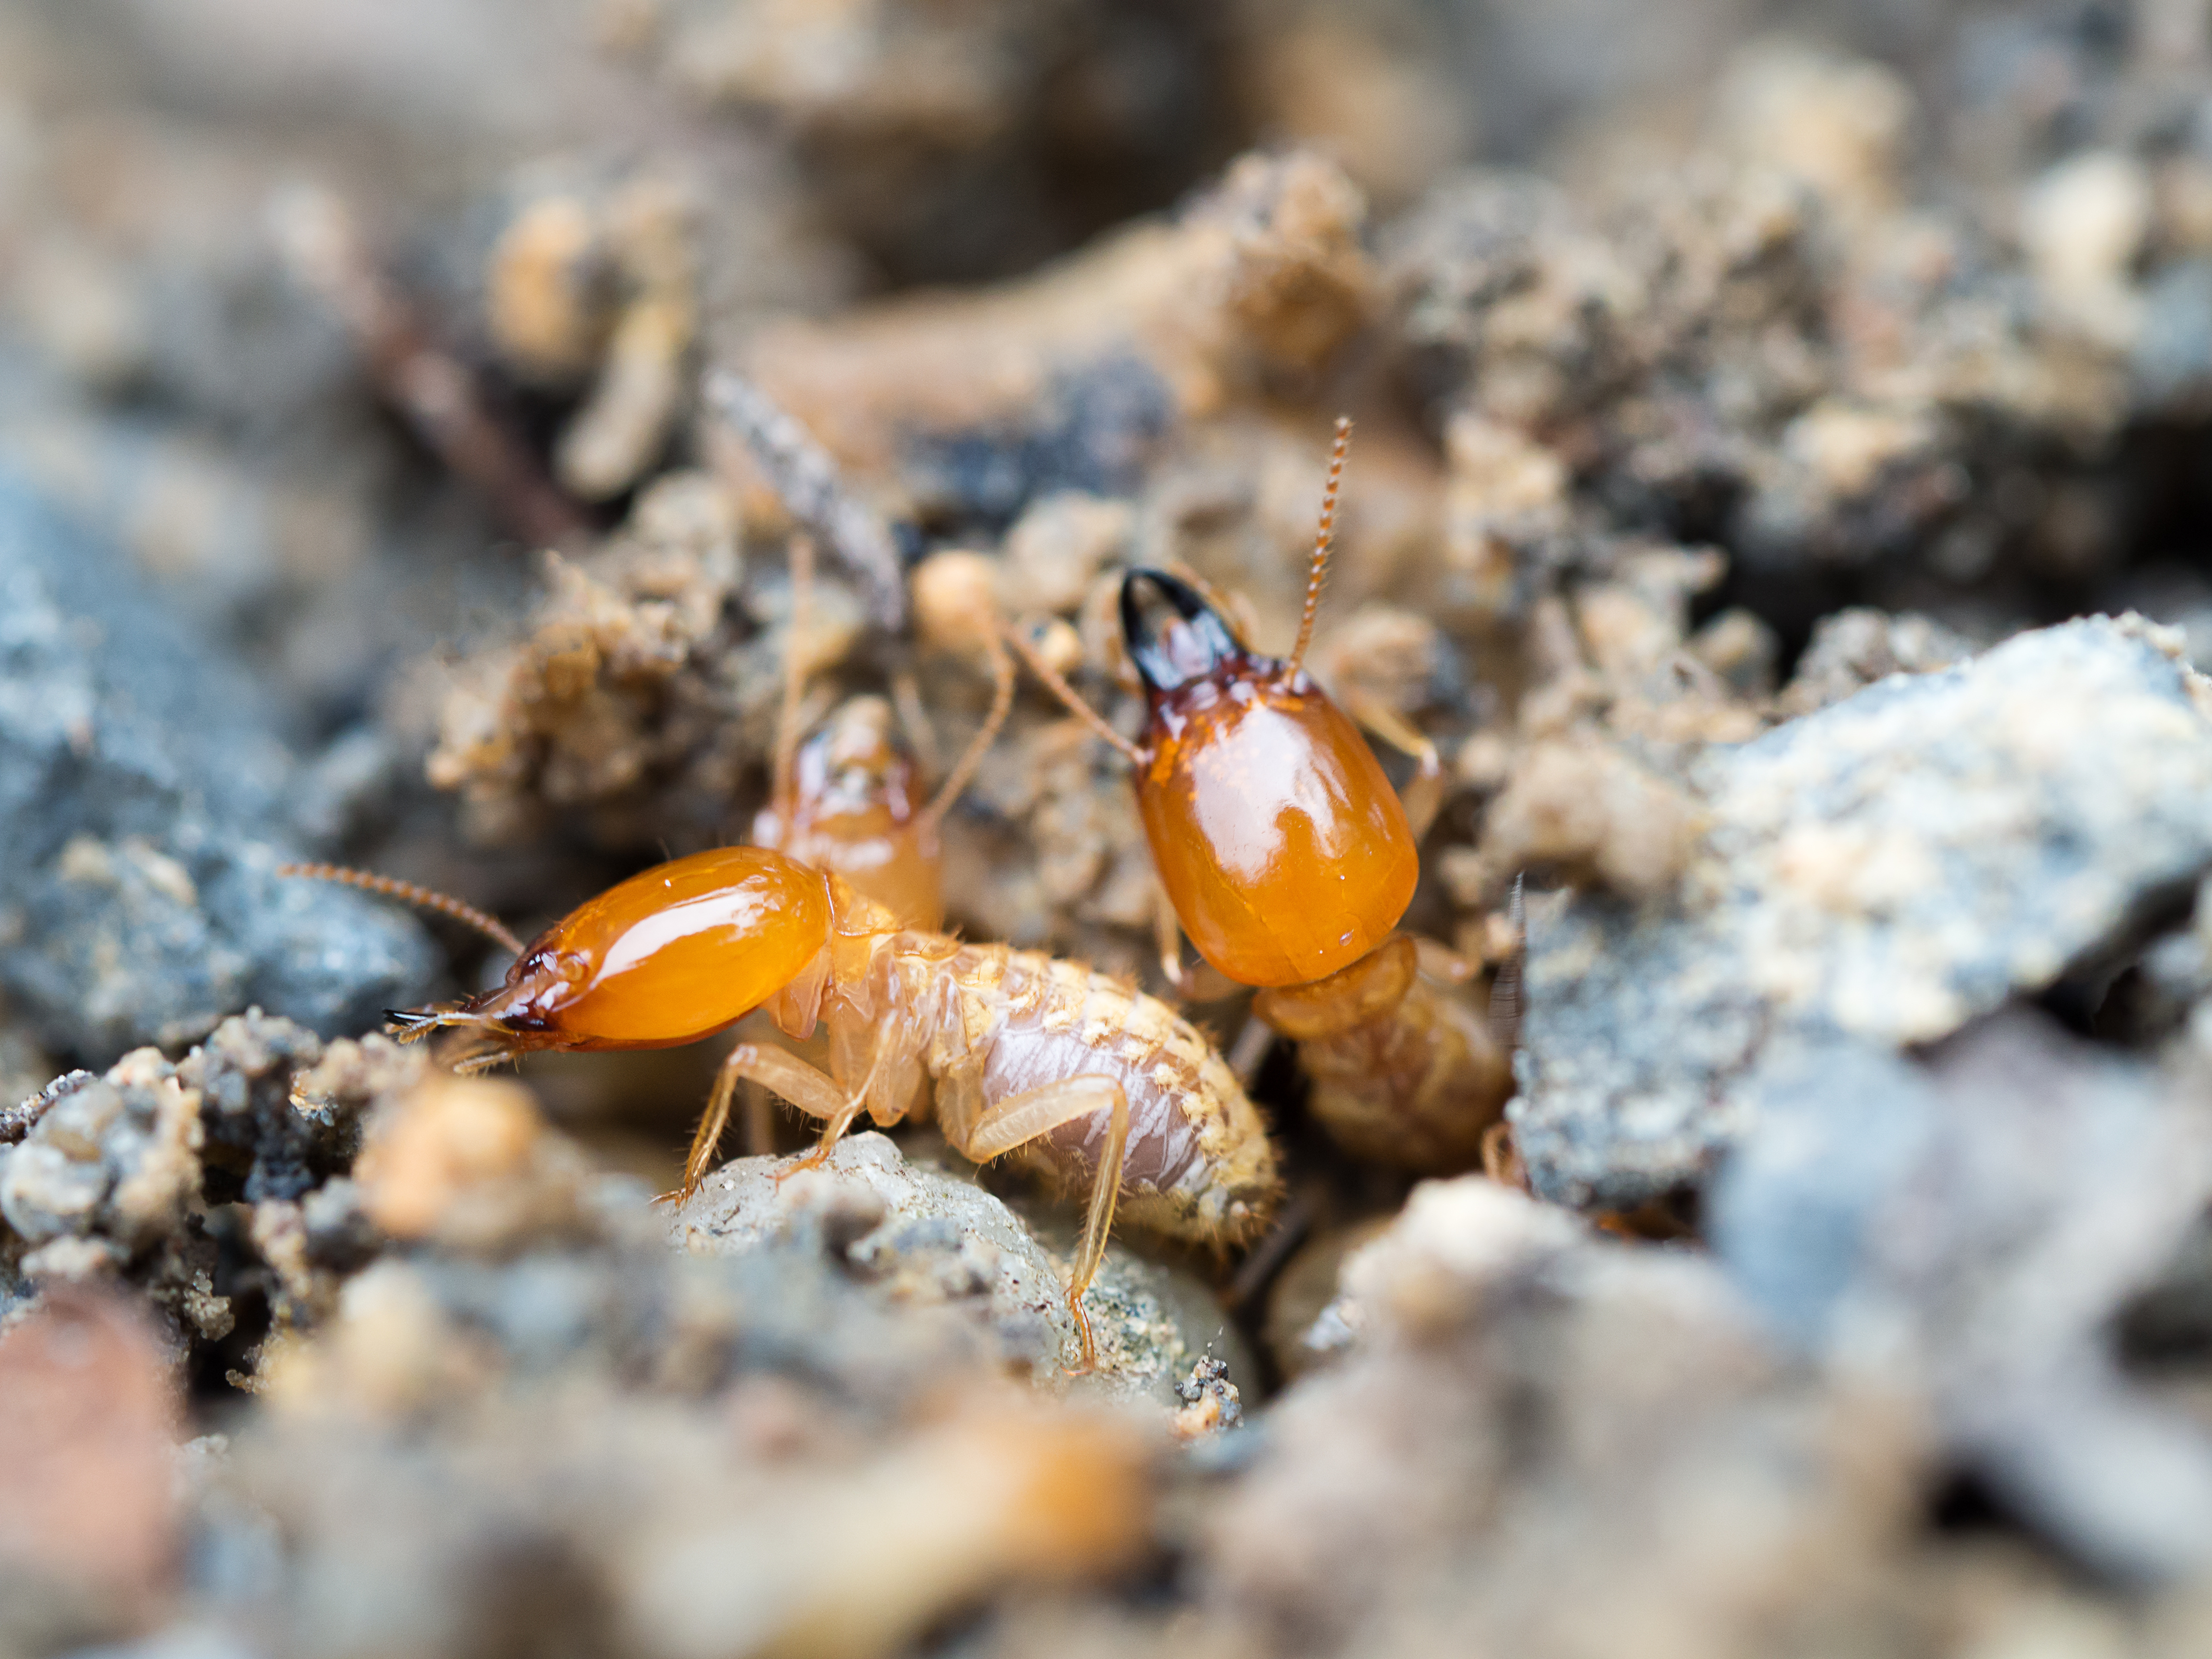 Formosan termites - contact GGA Pest Management Killeen today for termite removal!